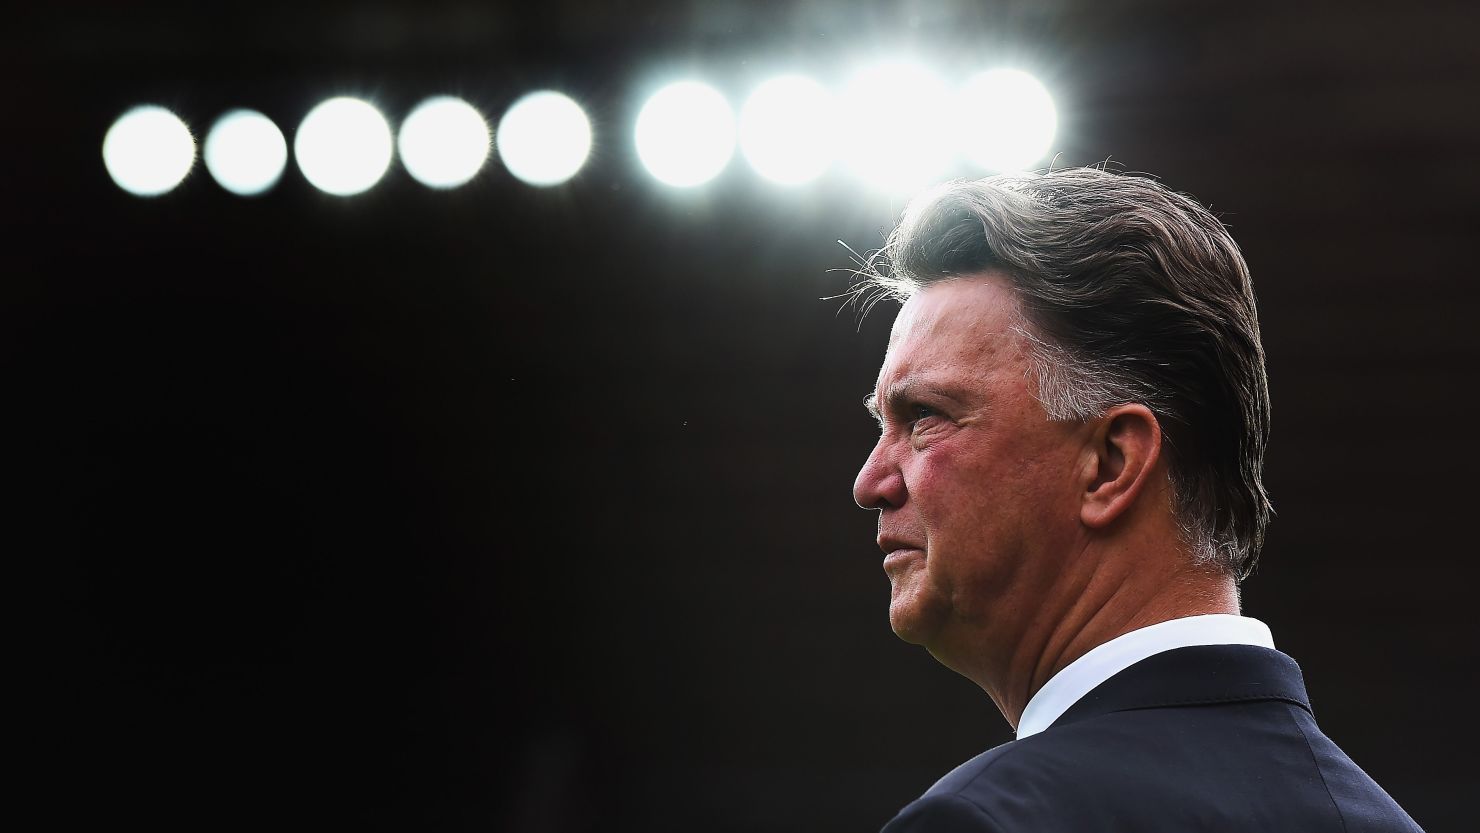 Manchester United coach Louis van Gaal is without a league win this season.